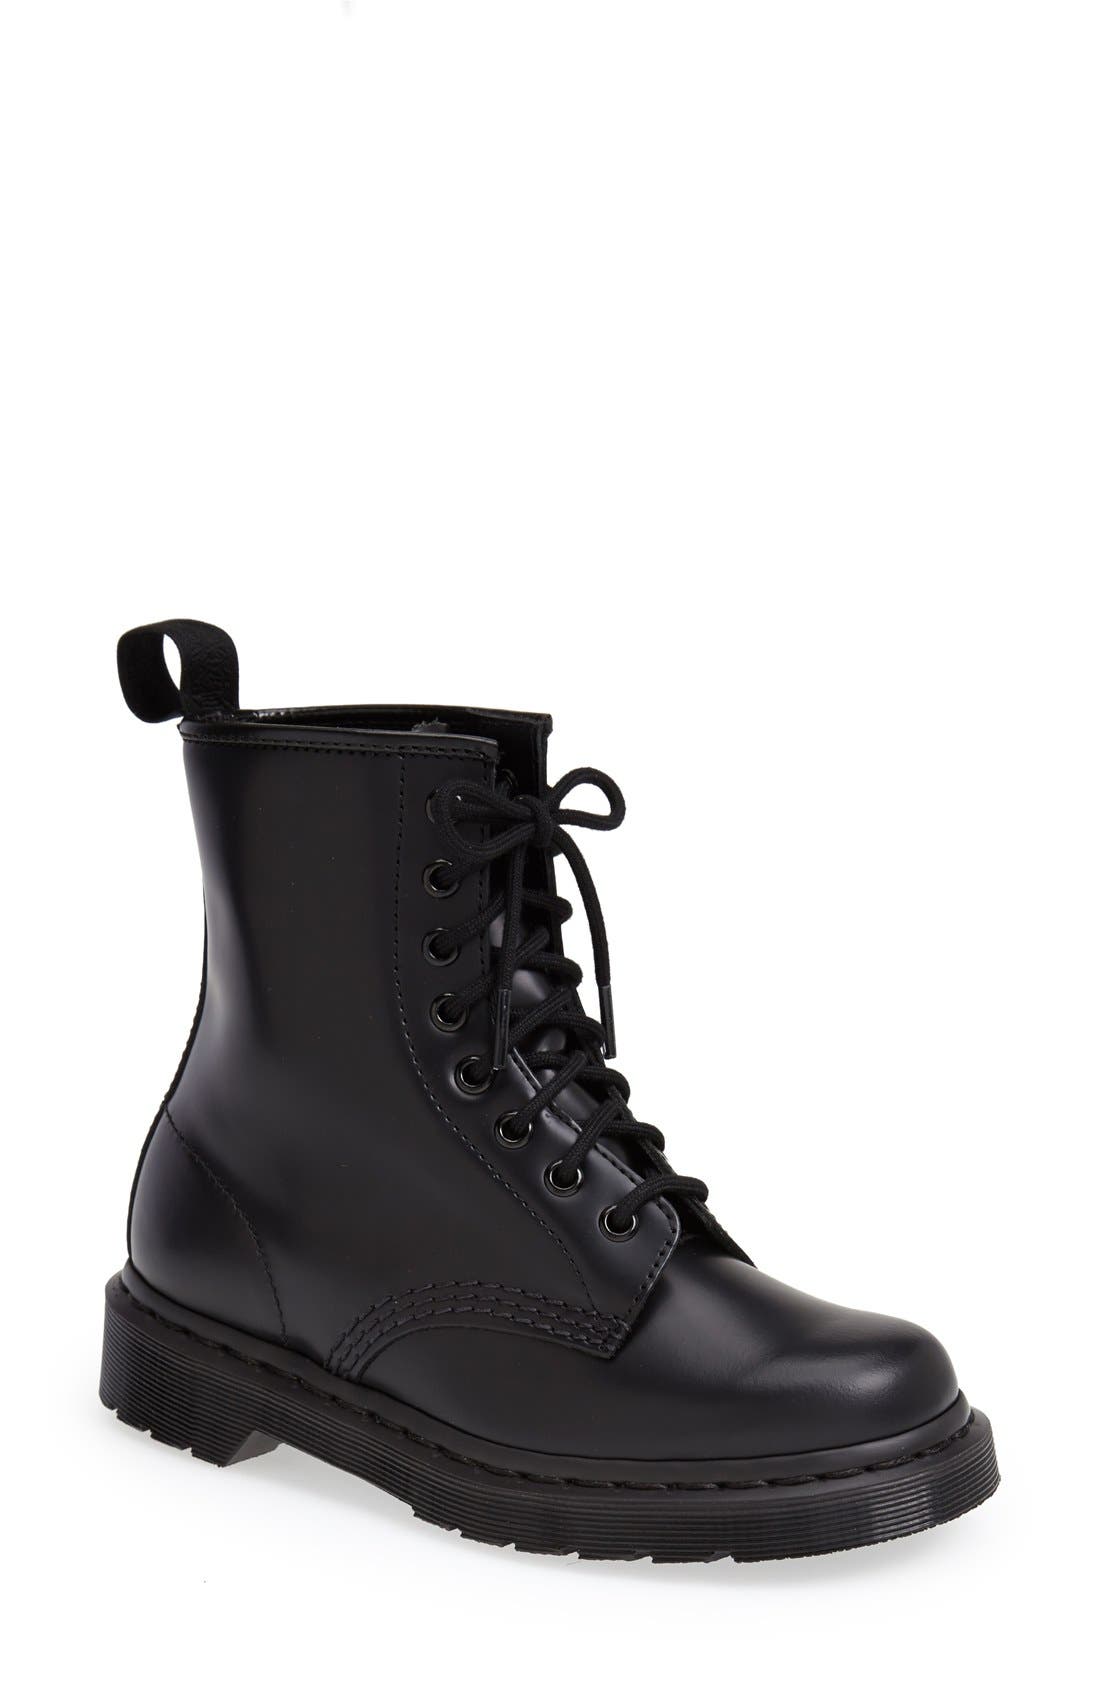 Dr.Martens 1460 8 Eyelet Mono Smooth Black Womens Boots